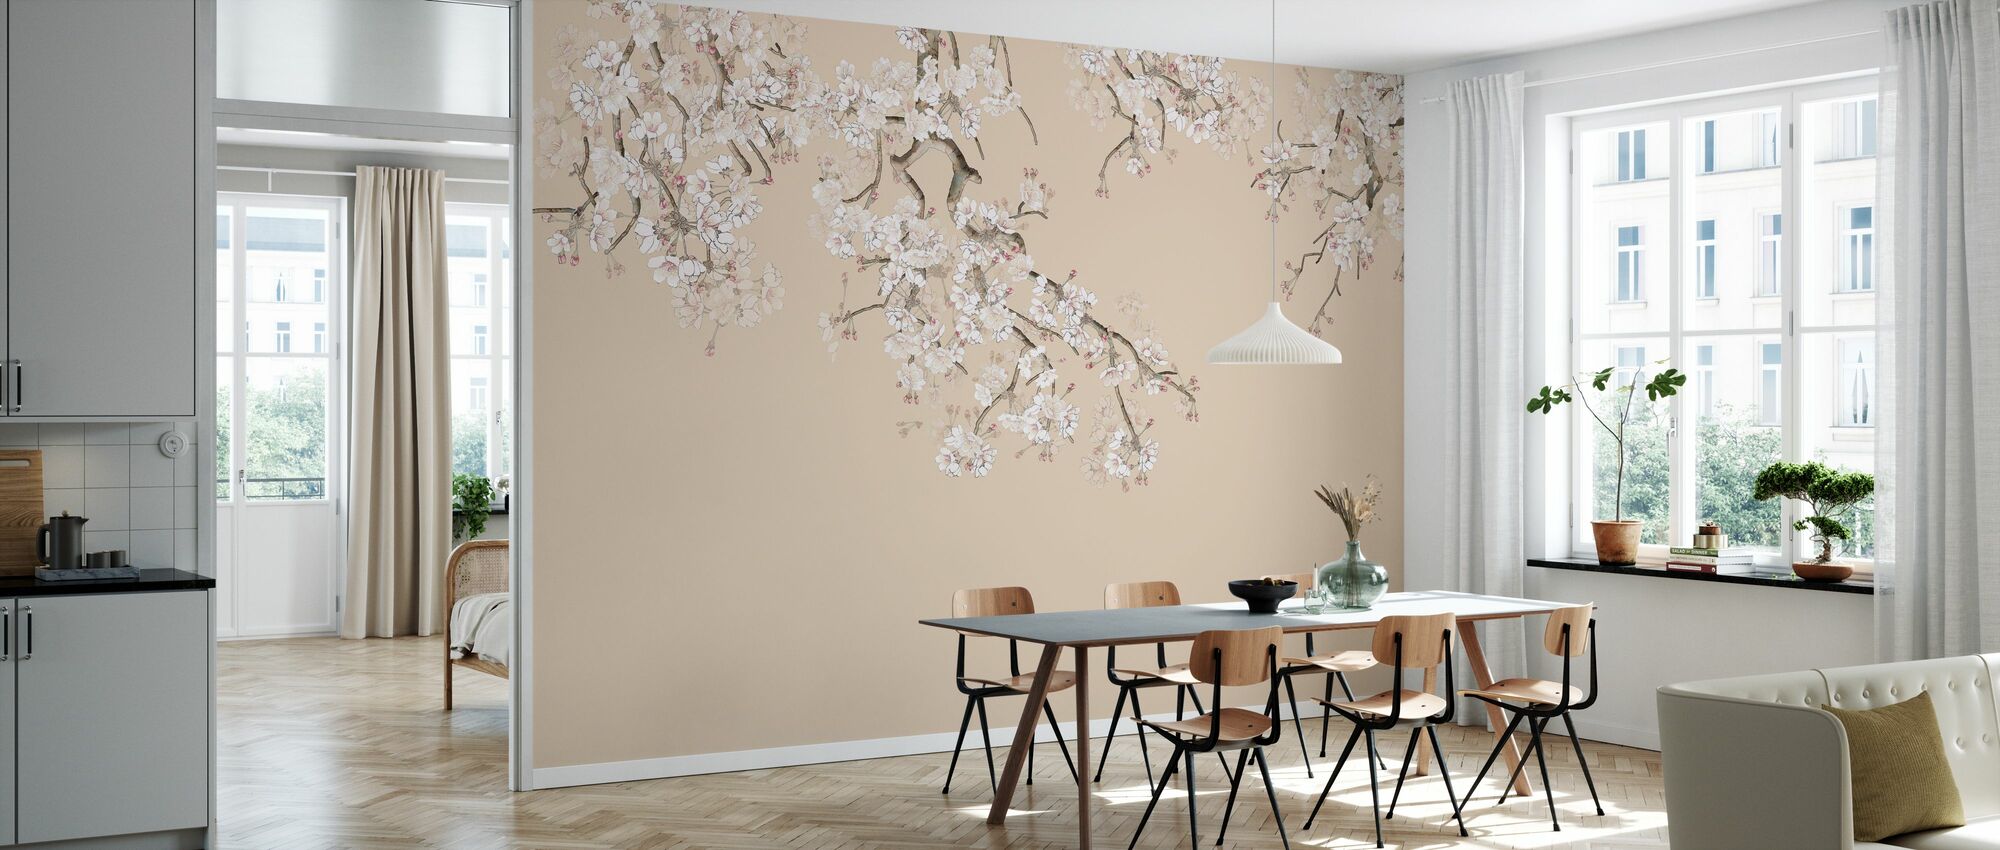 Hanging Branches in Peach wall mural / wallpaper - 21 fabulous spring-inspired wallpapers